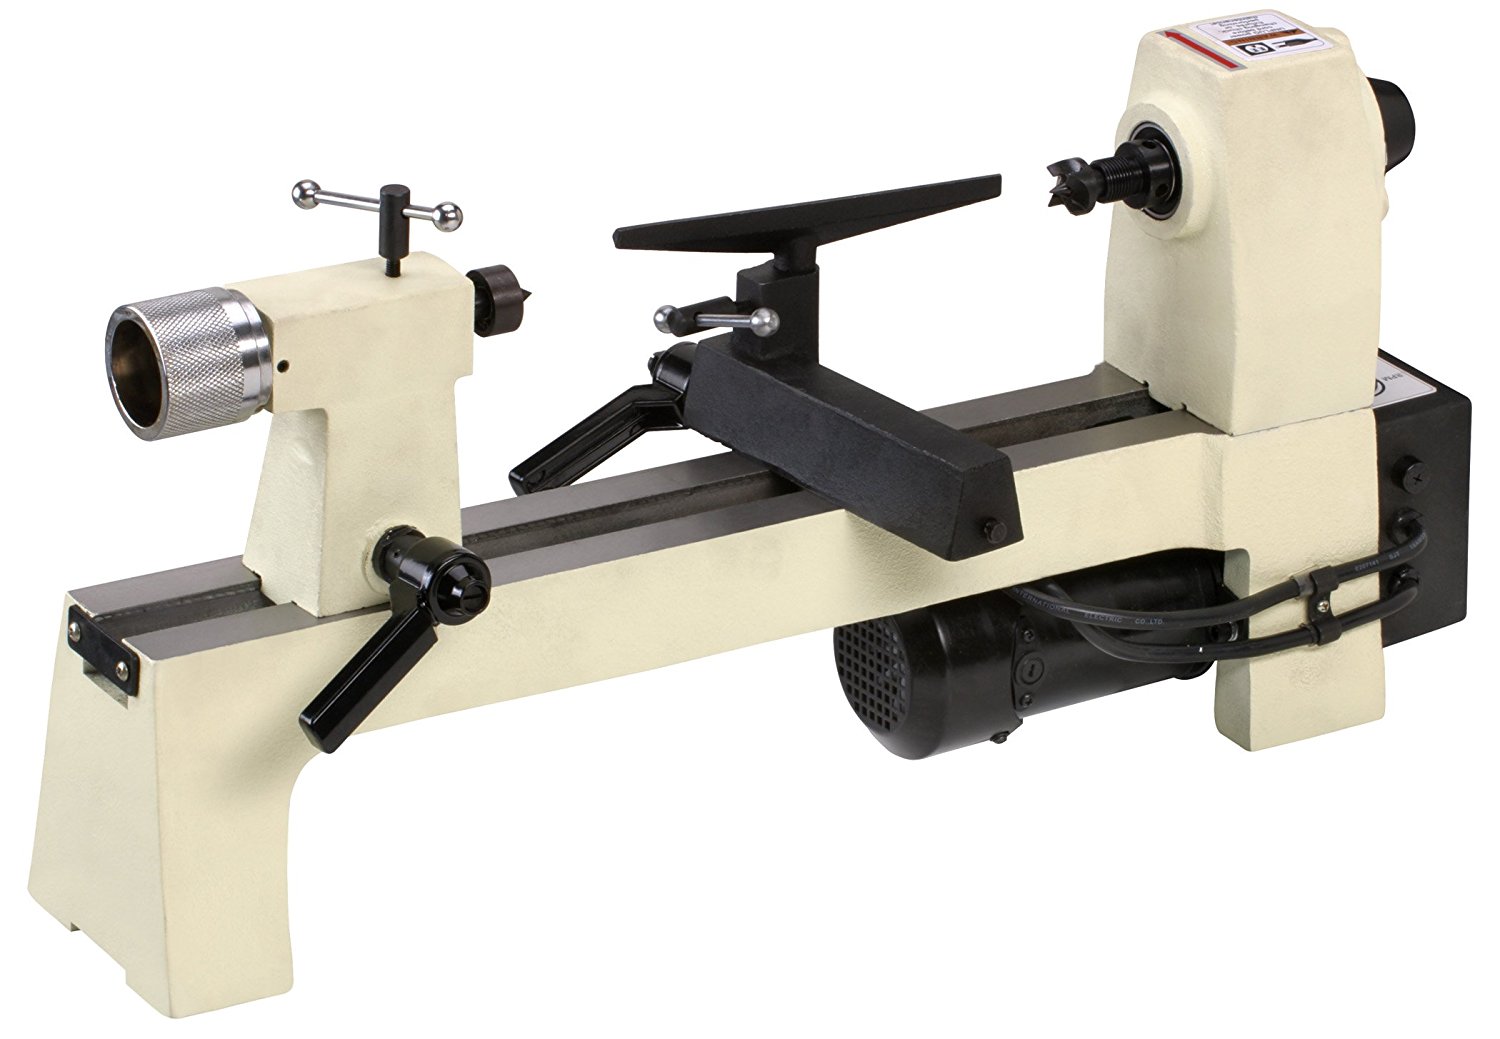 Best Mini Wood Lathes Reviewed in 2021 | EarlyExperts